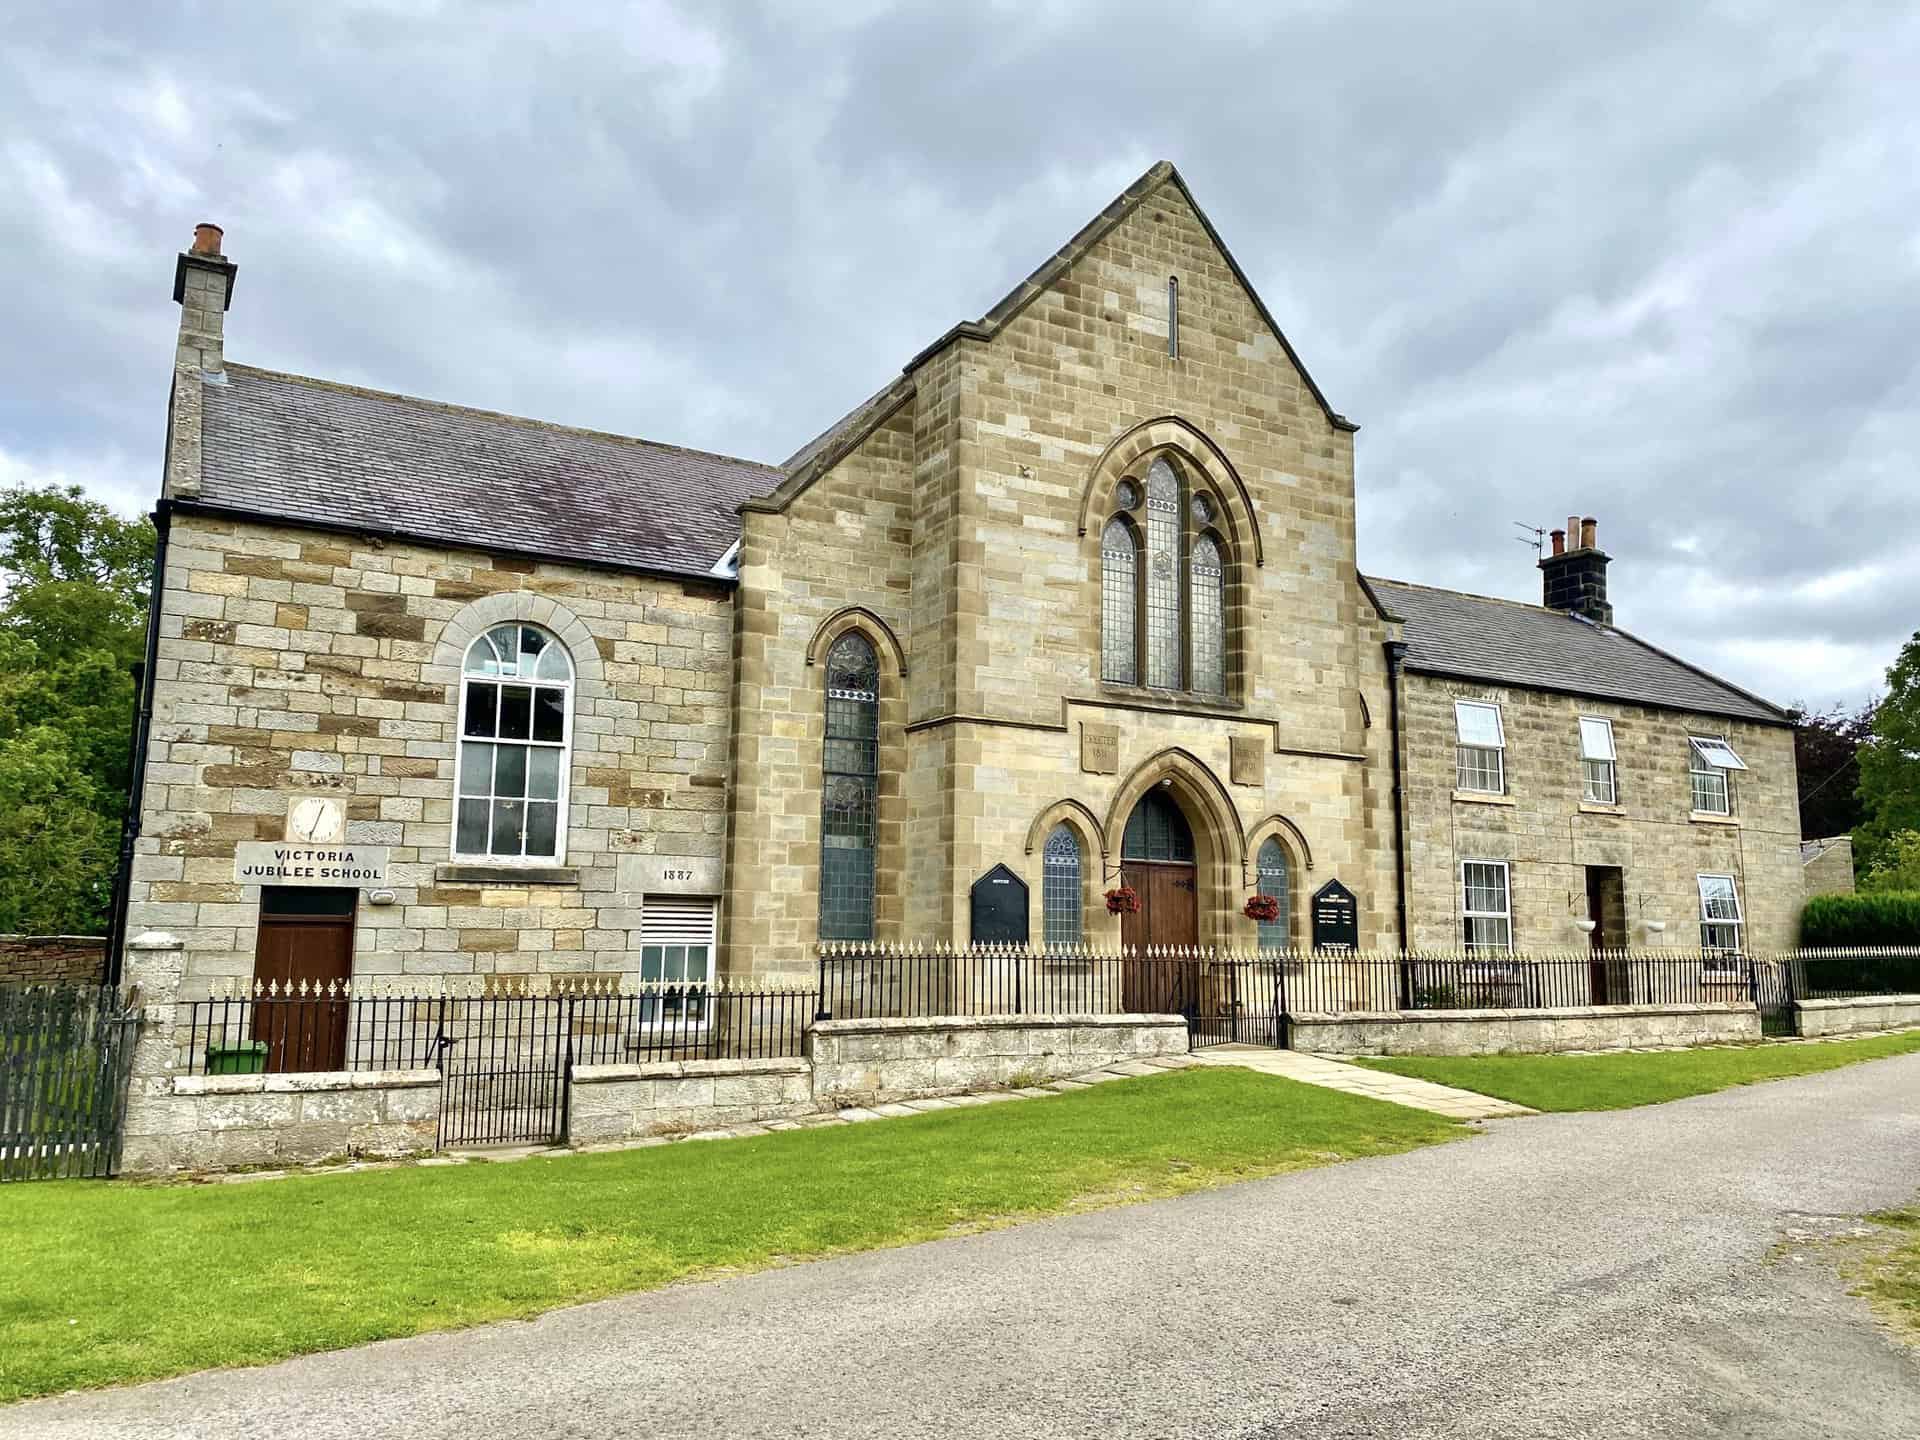 Danby Methodist Church, built in 1811, and the Victoria Jubilee School, added in 1887 to celebrate Queen Victoria's 50th year on the thrown.